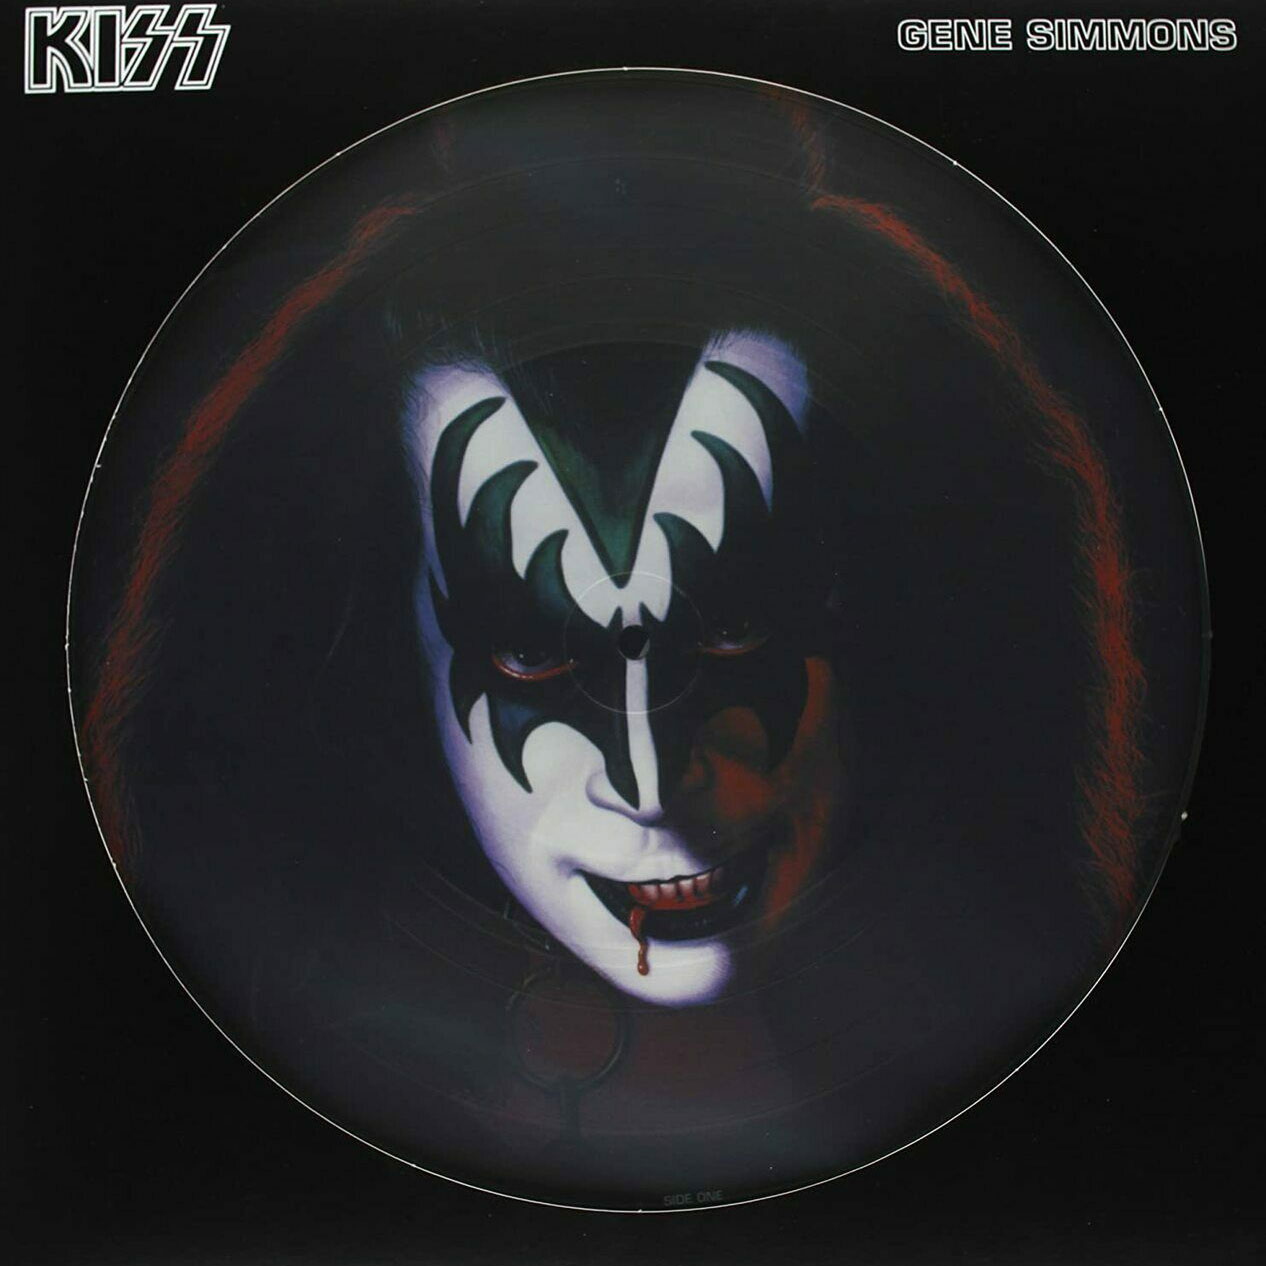 Kiss - Gene Simmons (Picture Disc) - LP